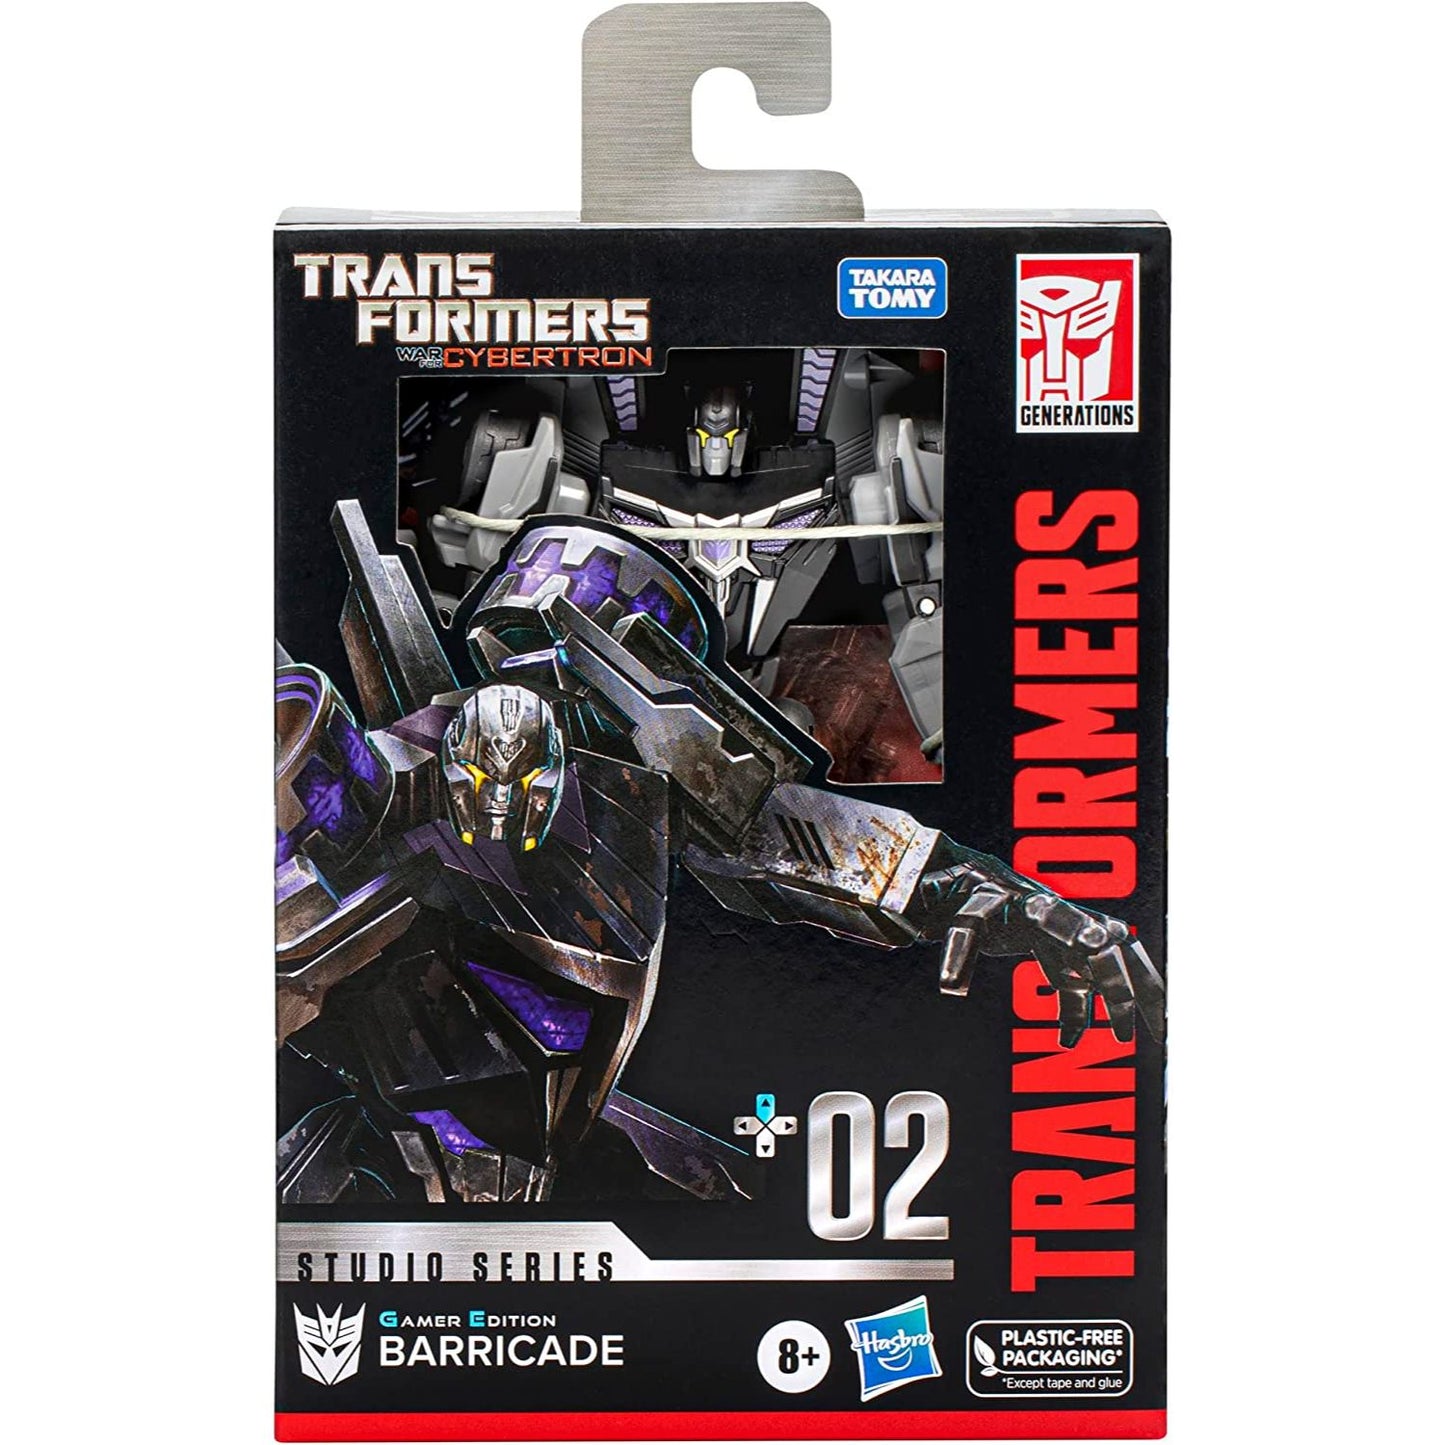 Transformers Toys Studio Series Deluxe Class 02 Gamer Edition War For Cybertron Barricade